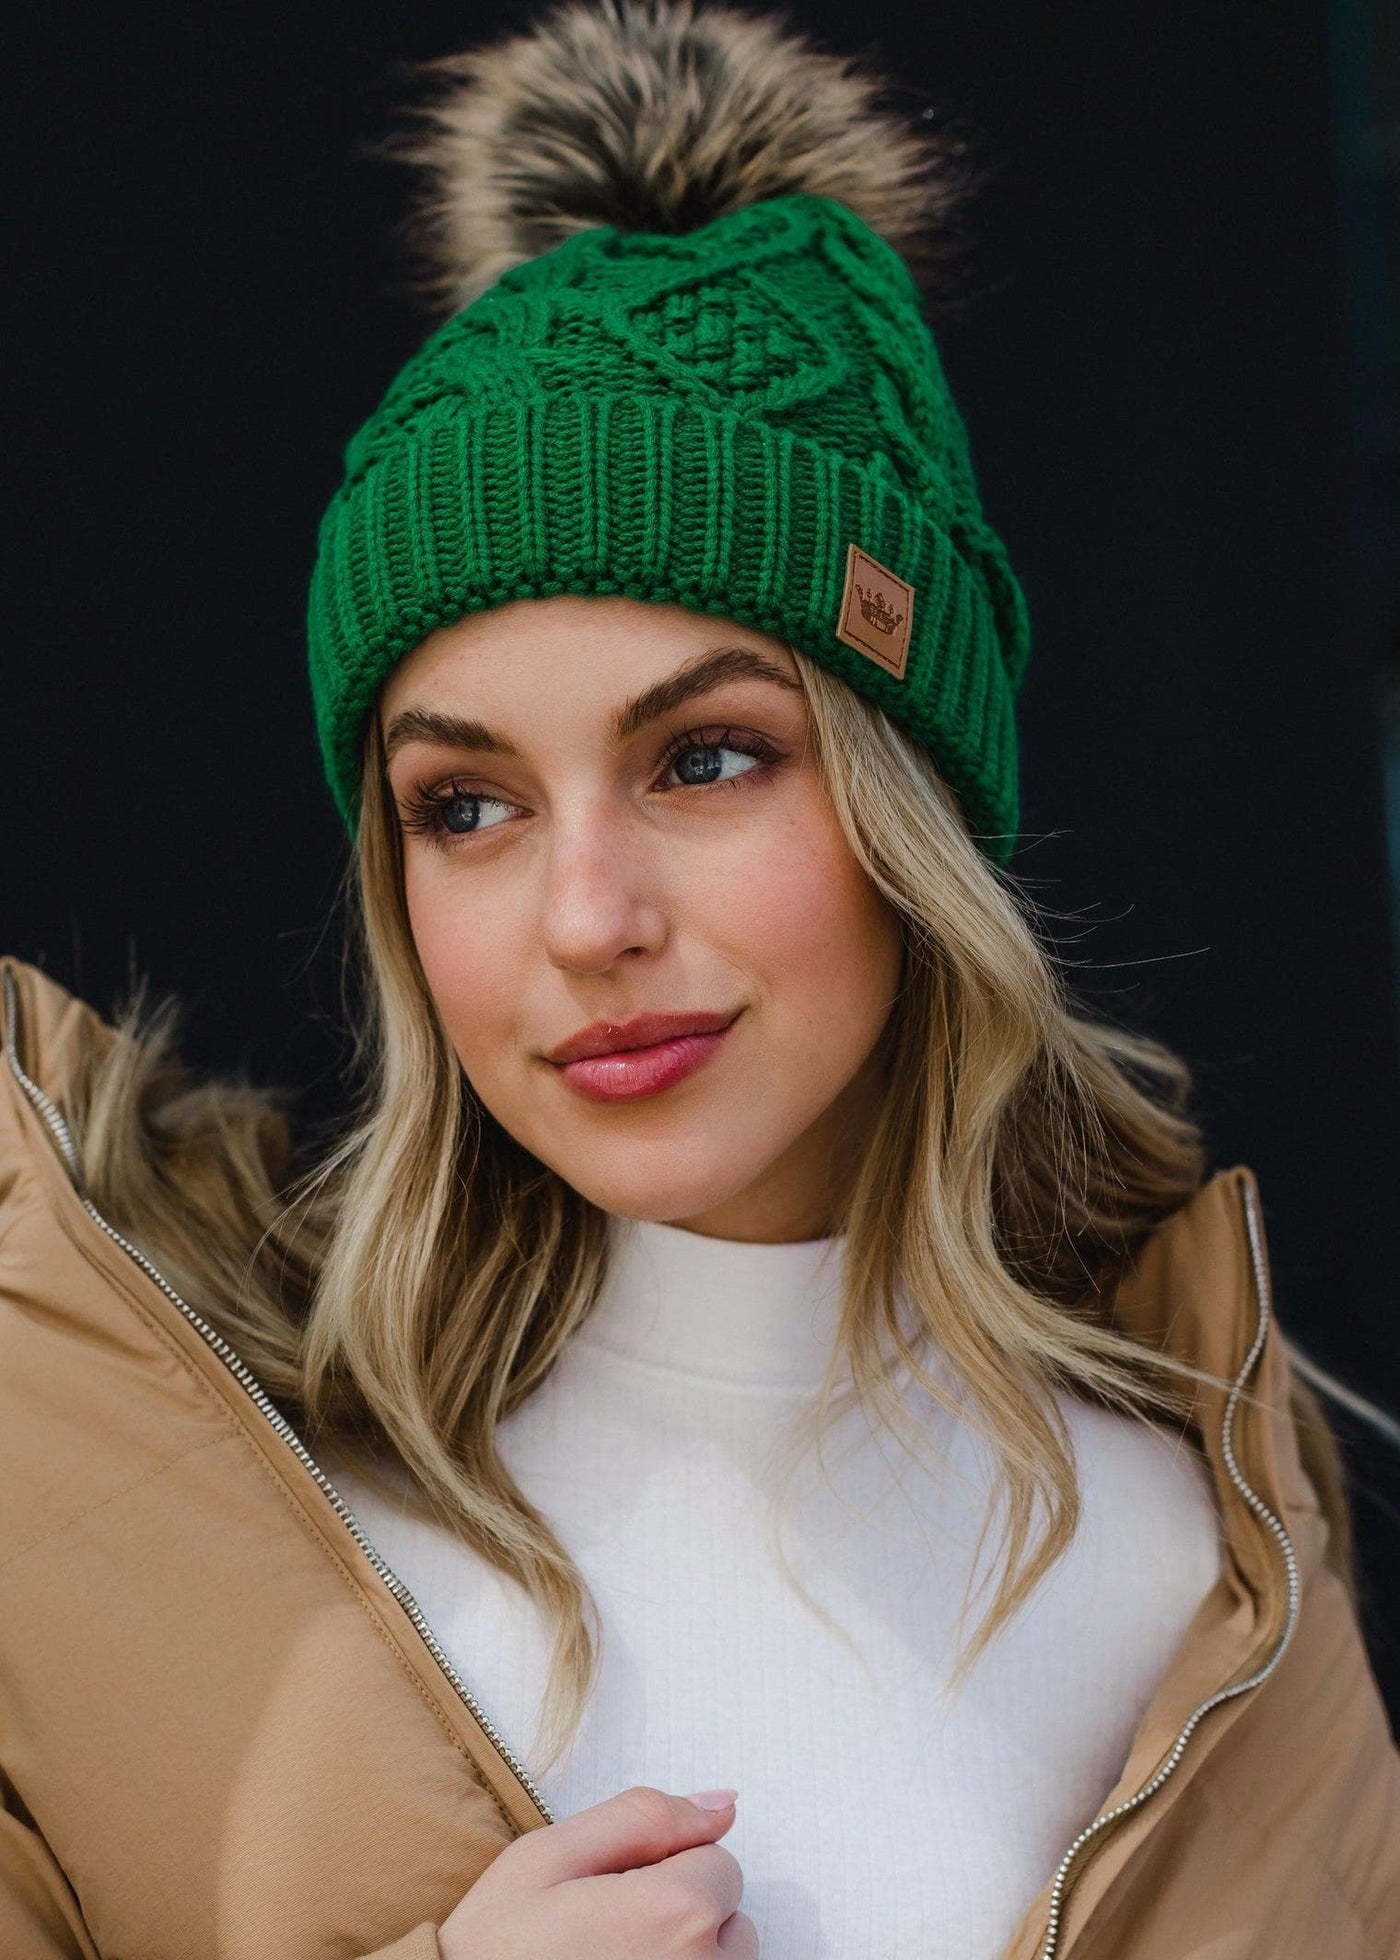 Green Cable Knit Hat Knit Beanie Scout and Poppy Fashion Boutique